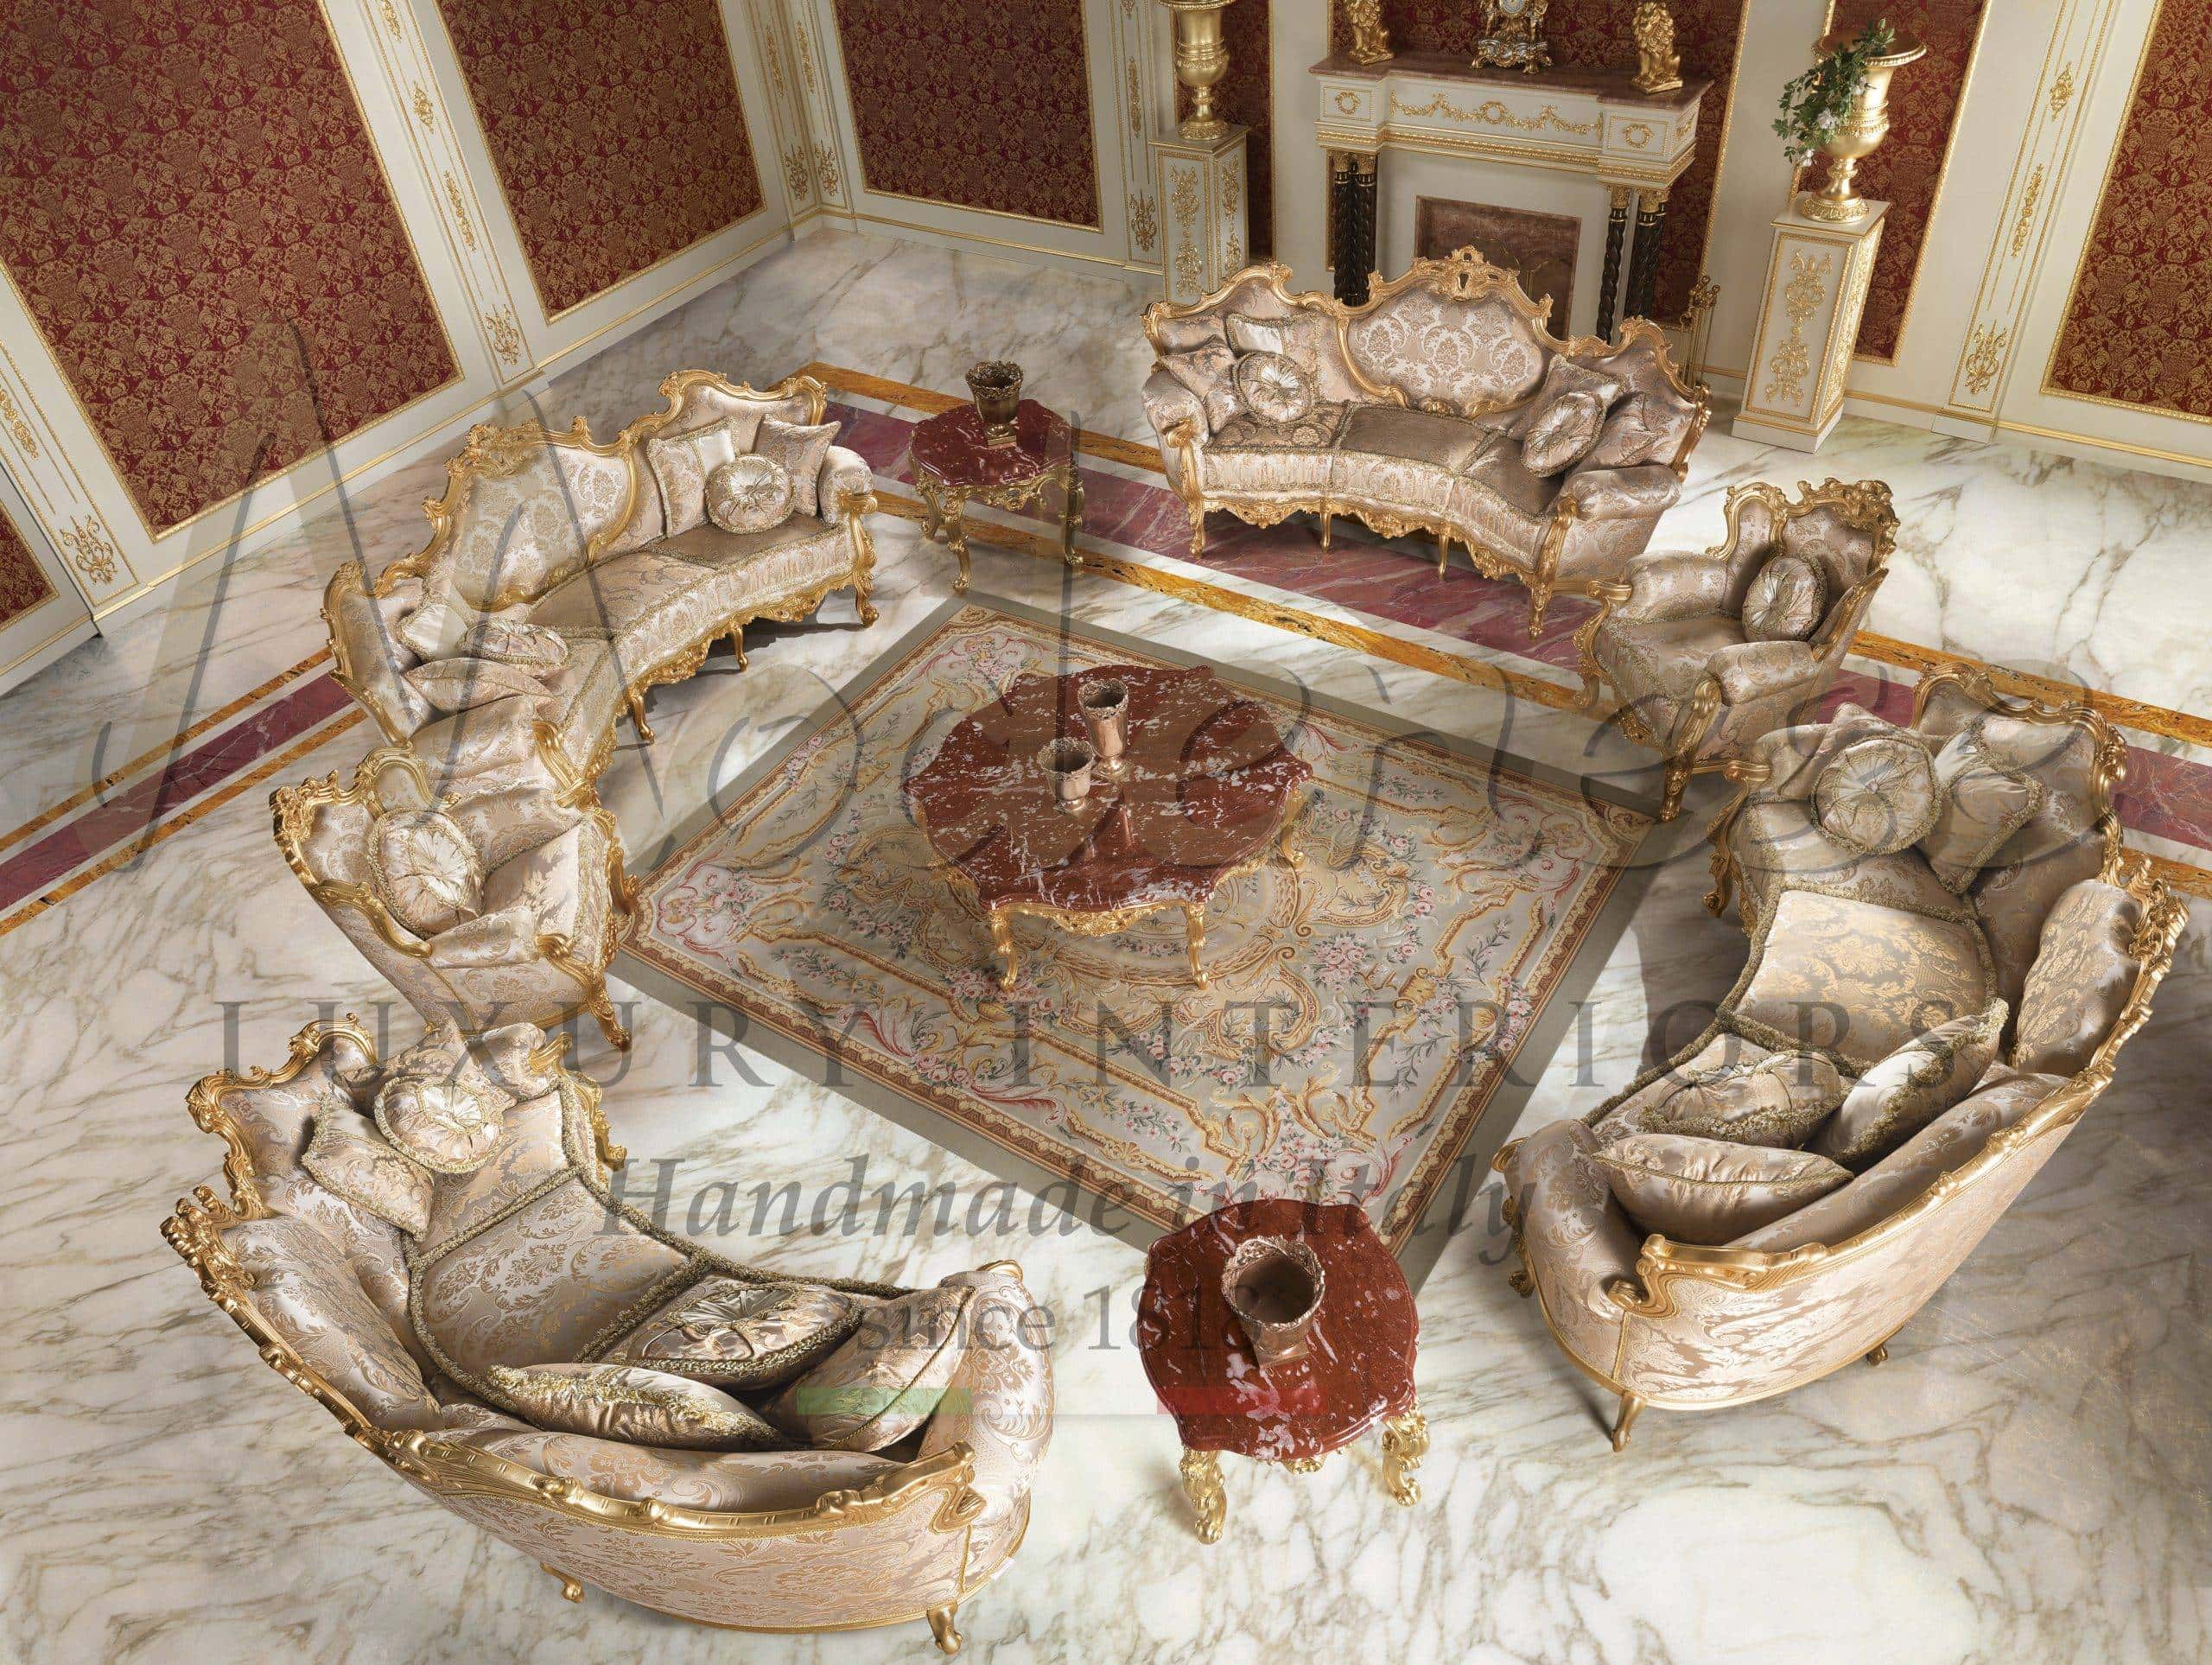 luxury classic carpets ornamental decorative royal palace elements and details golden opulent precious materials best selection interior design home decoration service consultant Italian high-end quality handmade carpets rmade in Italy quality traditional timeless unique rugs design